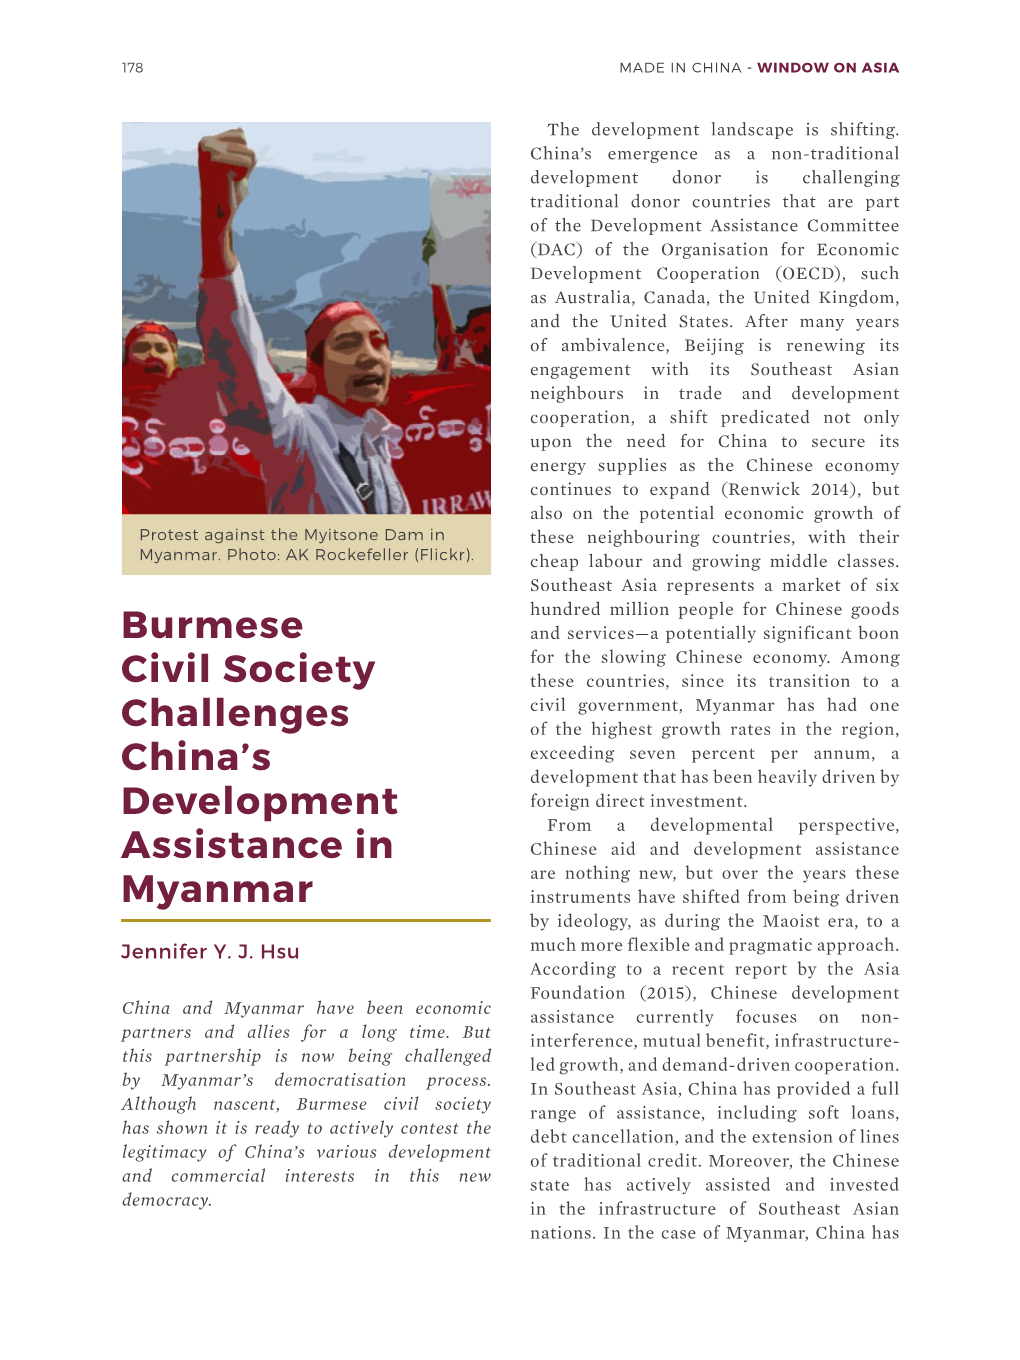 Burmese Civil Society Challenges China's Development Assistance In